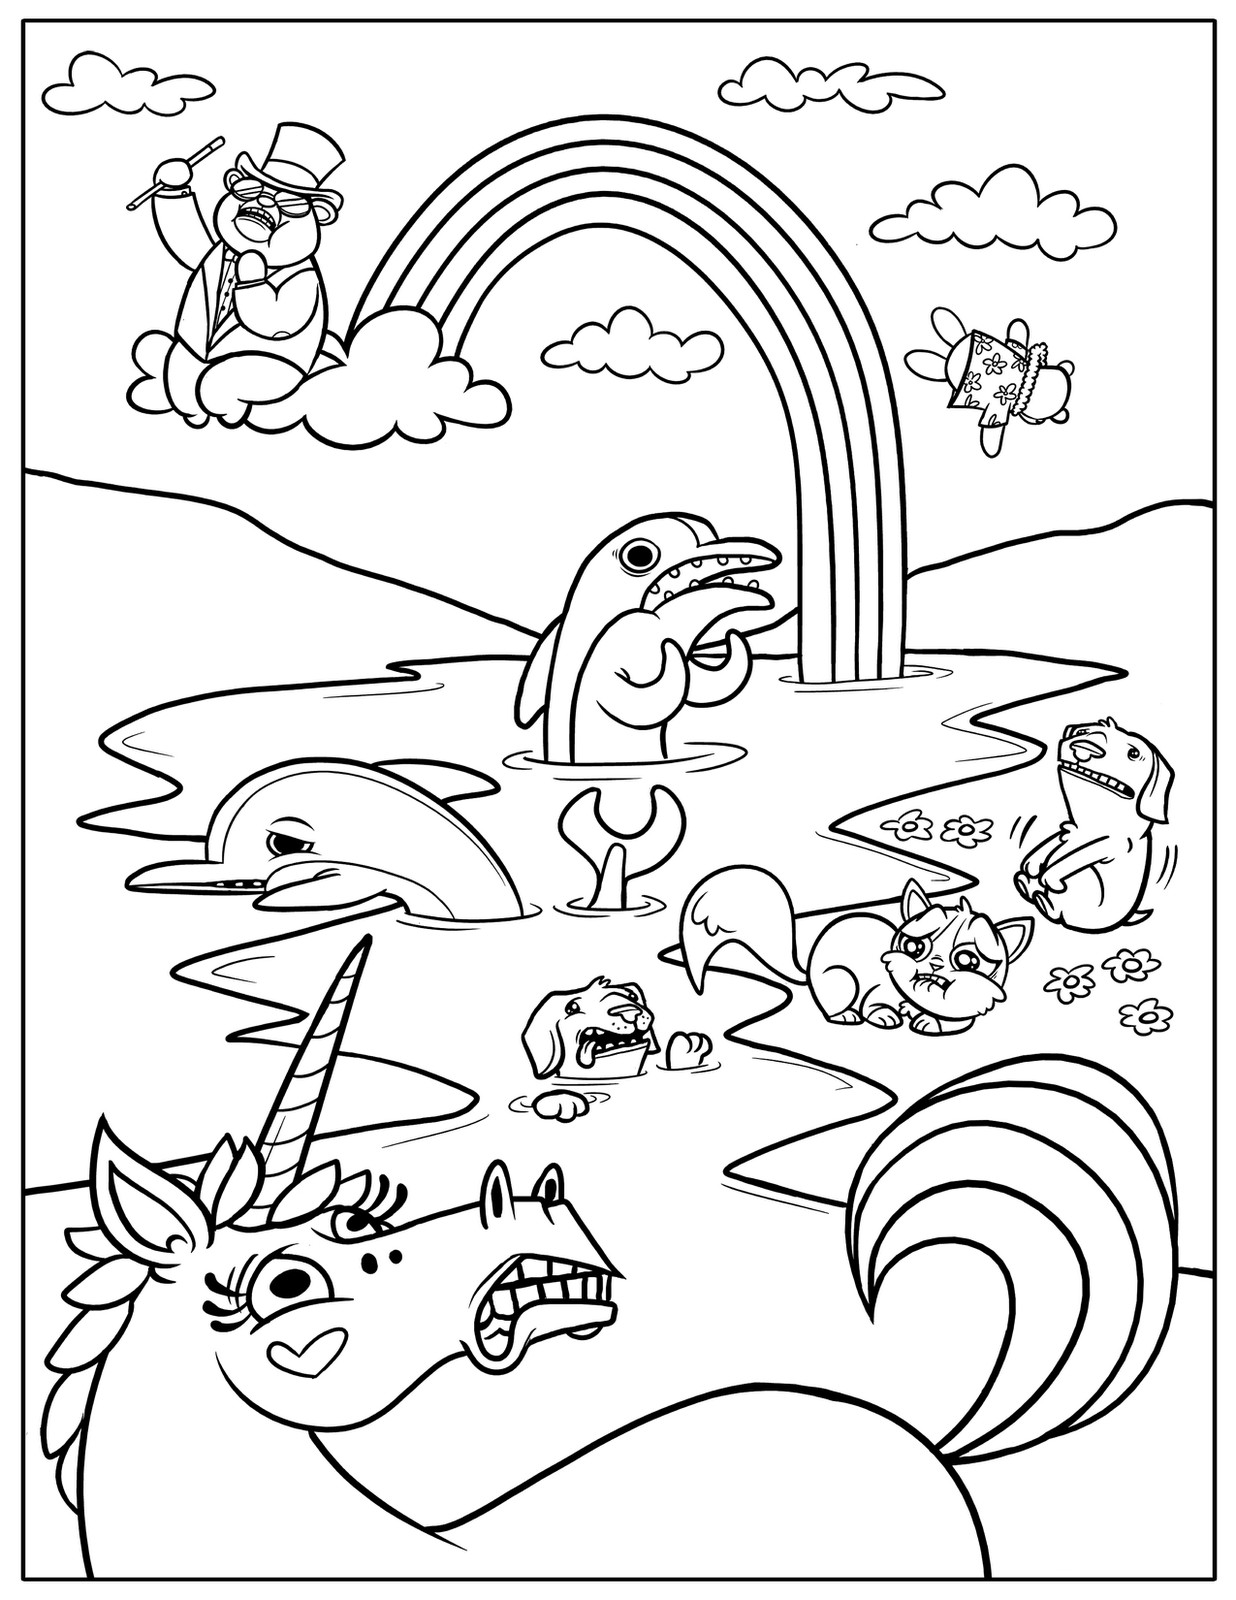 Fun Coloring Sheets For Kids
 Free Printable Rainbow Coloring Pages For Kids